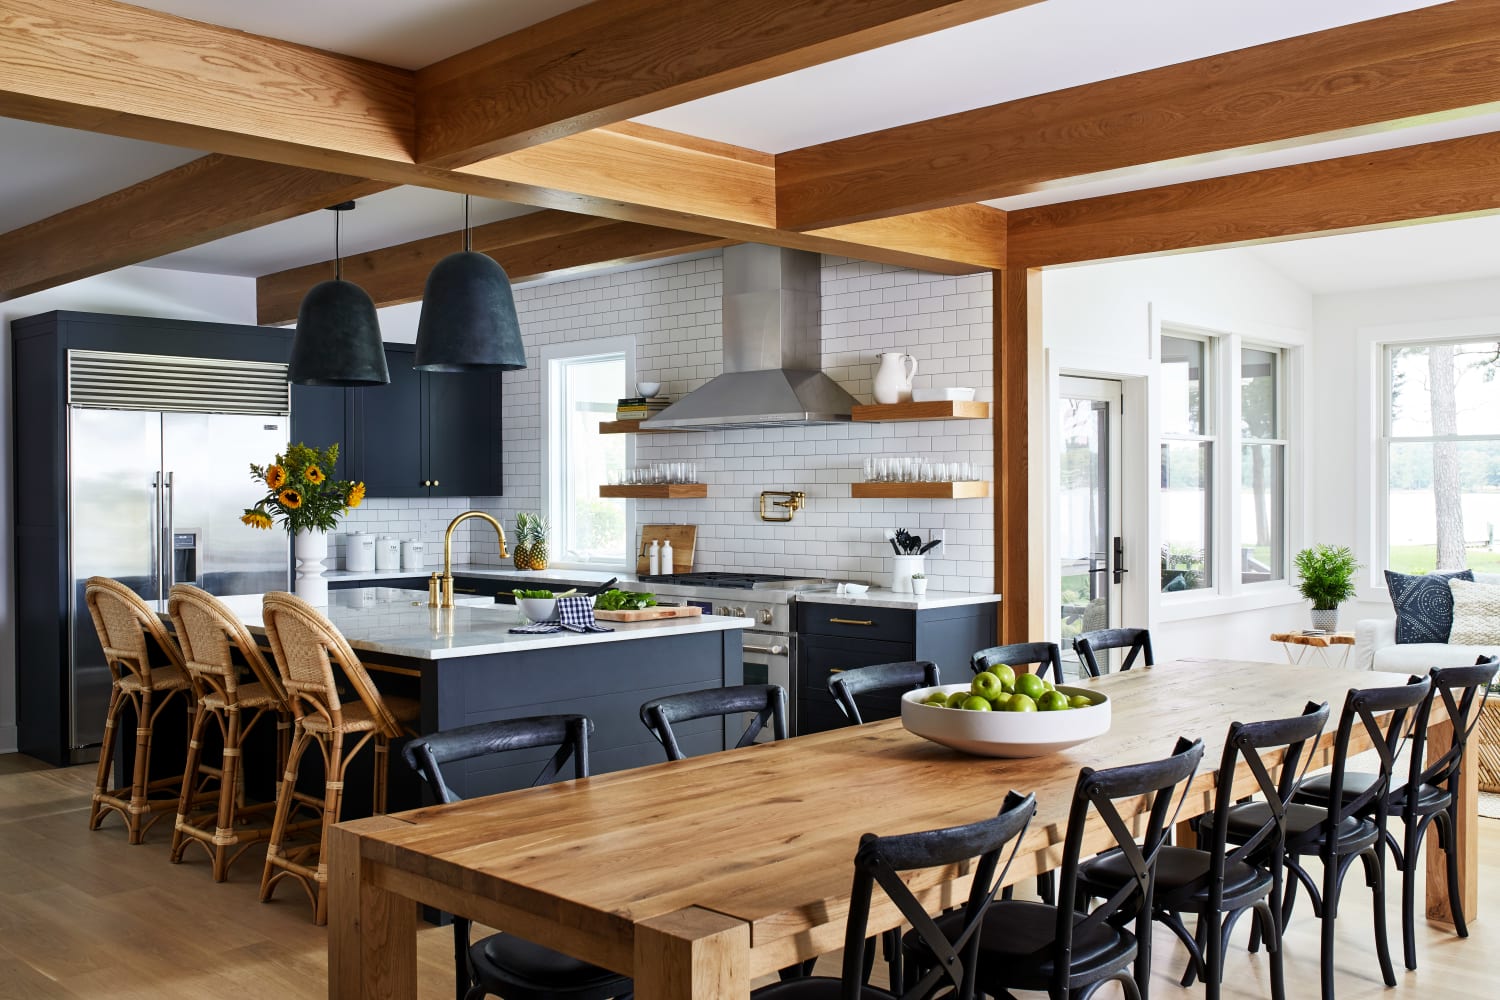 Kitchen and dining with wooden beams in a renoavted farmhouse-style residence, Eastern Shore of Maryland